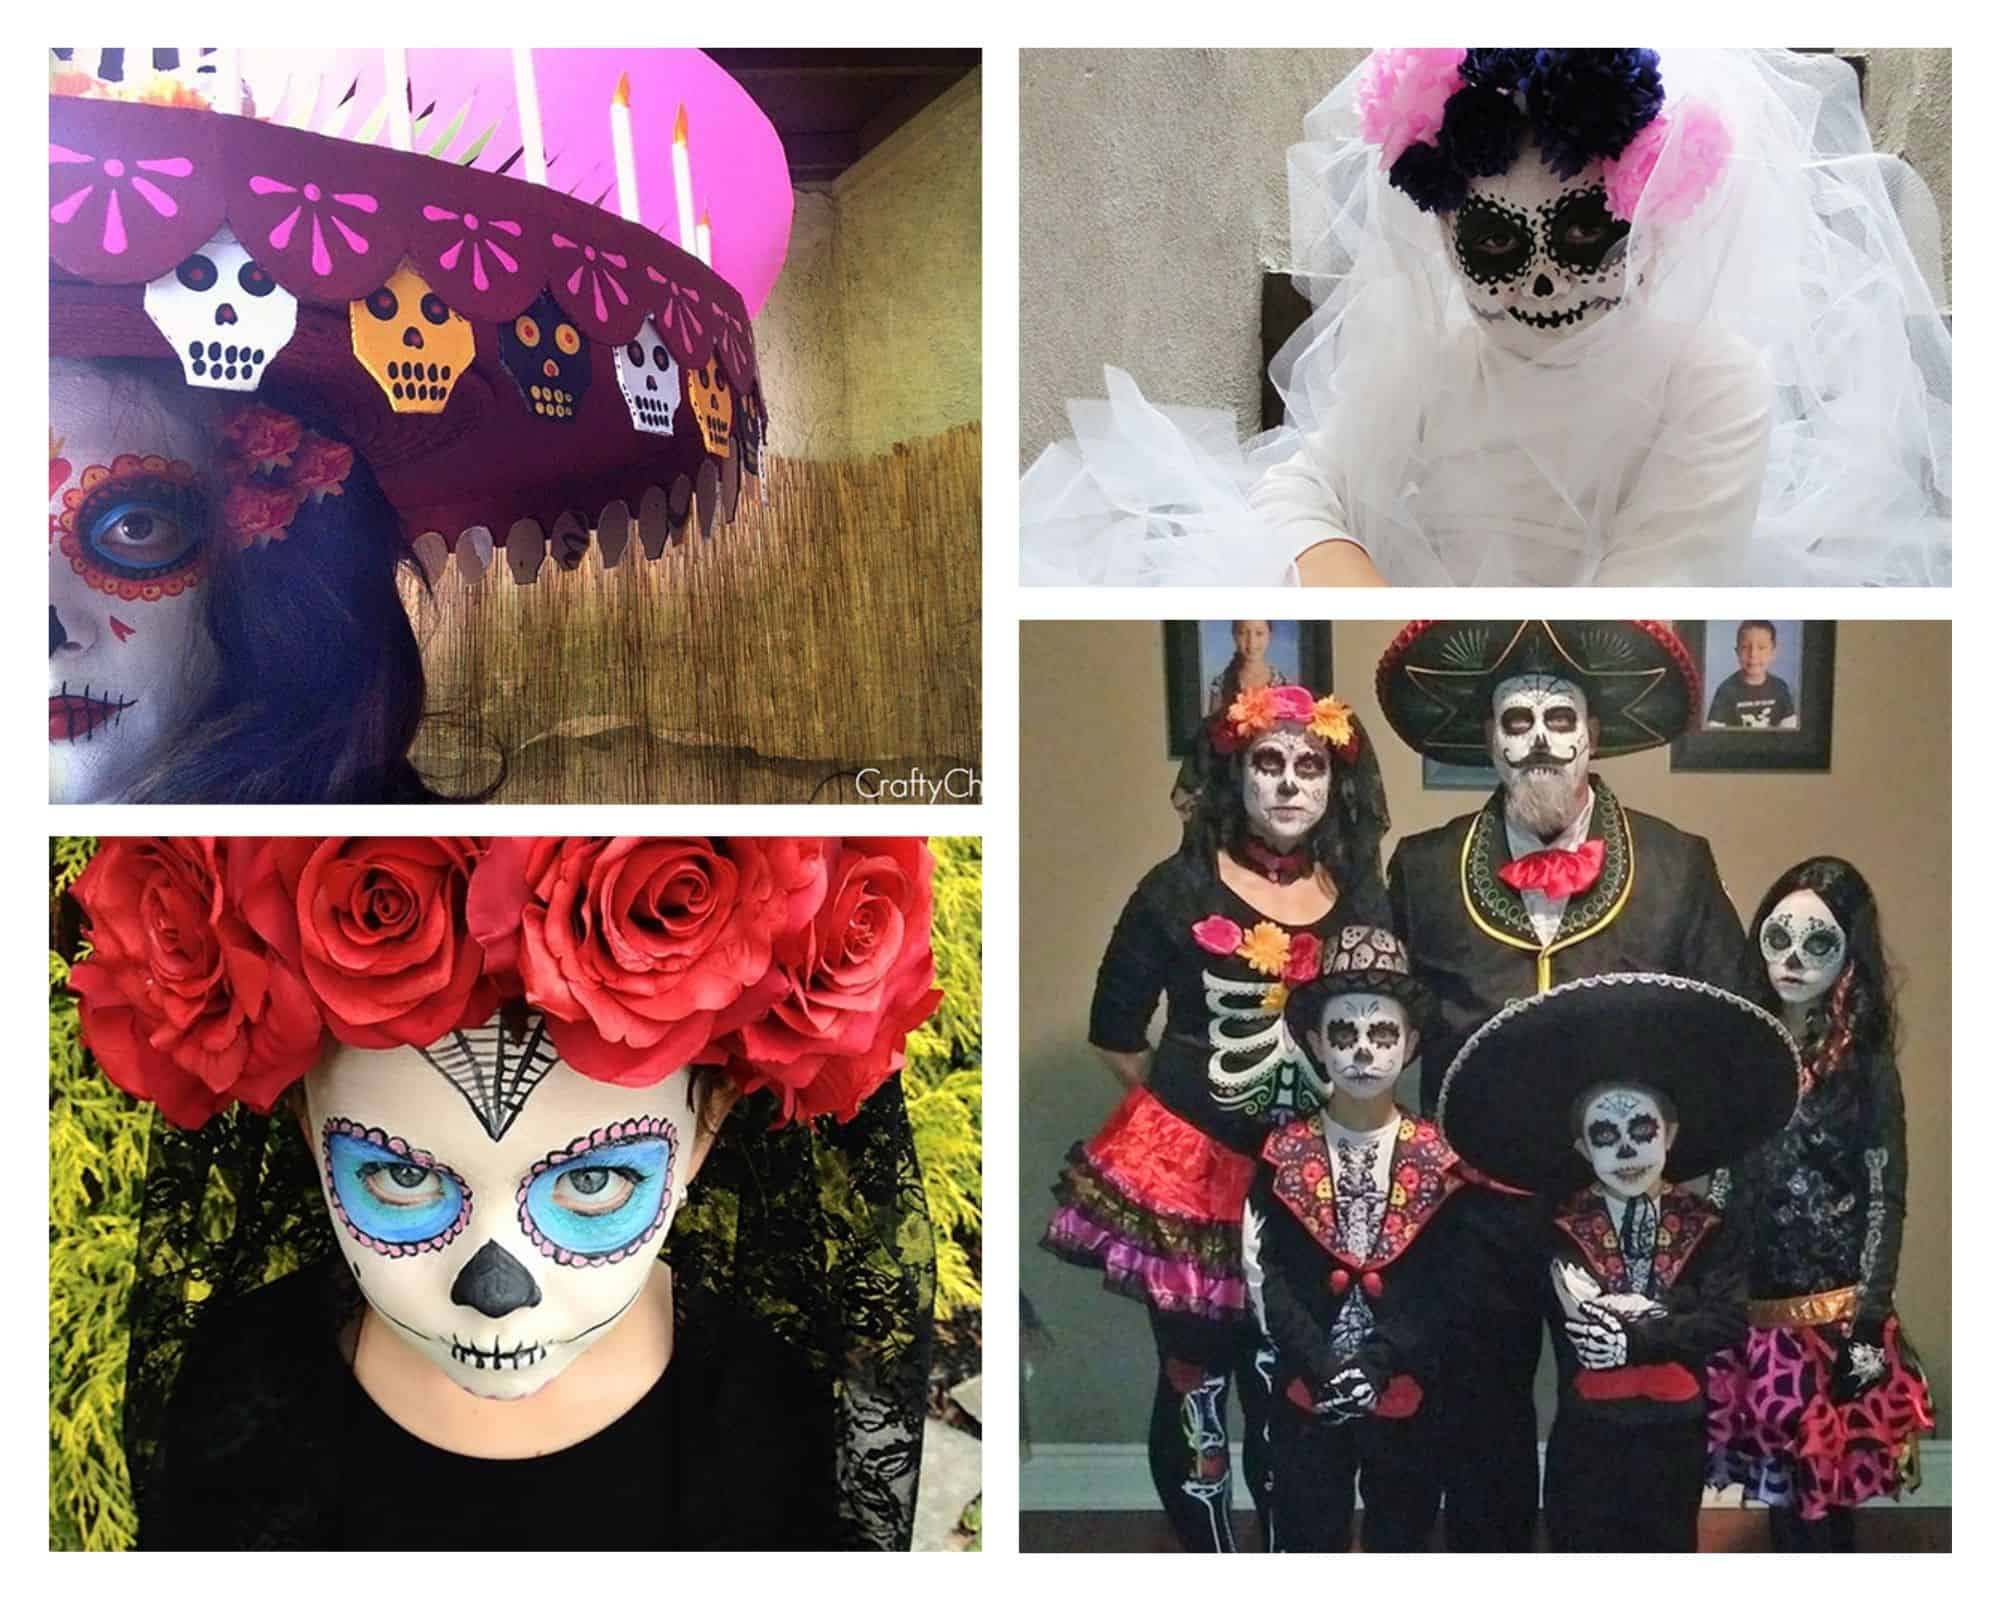 Day of the dead costume ideas